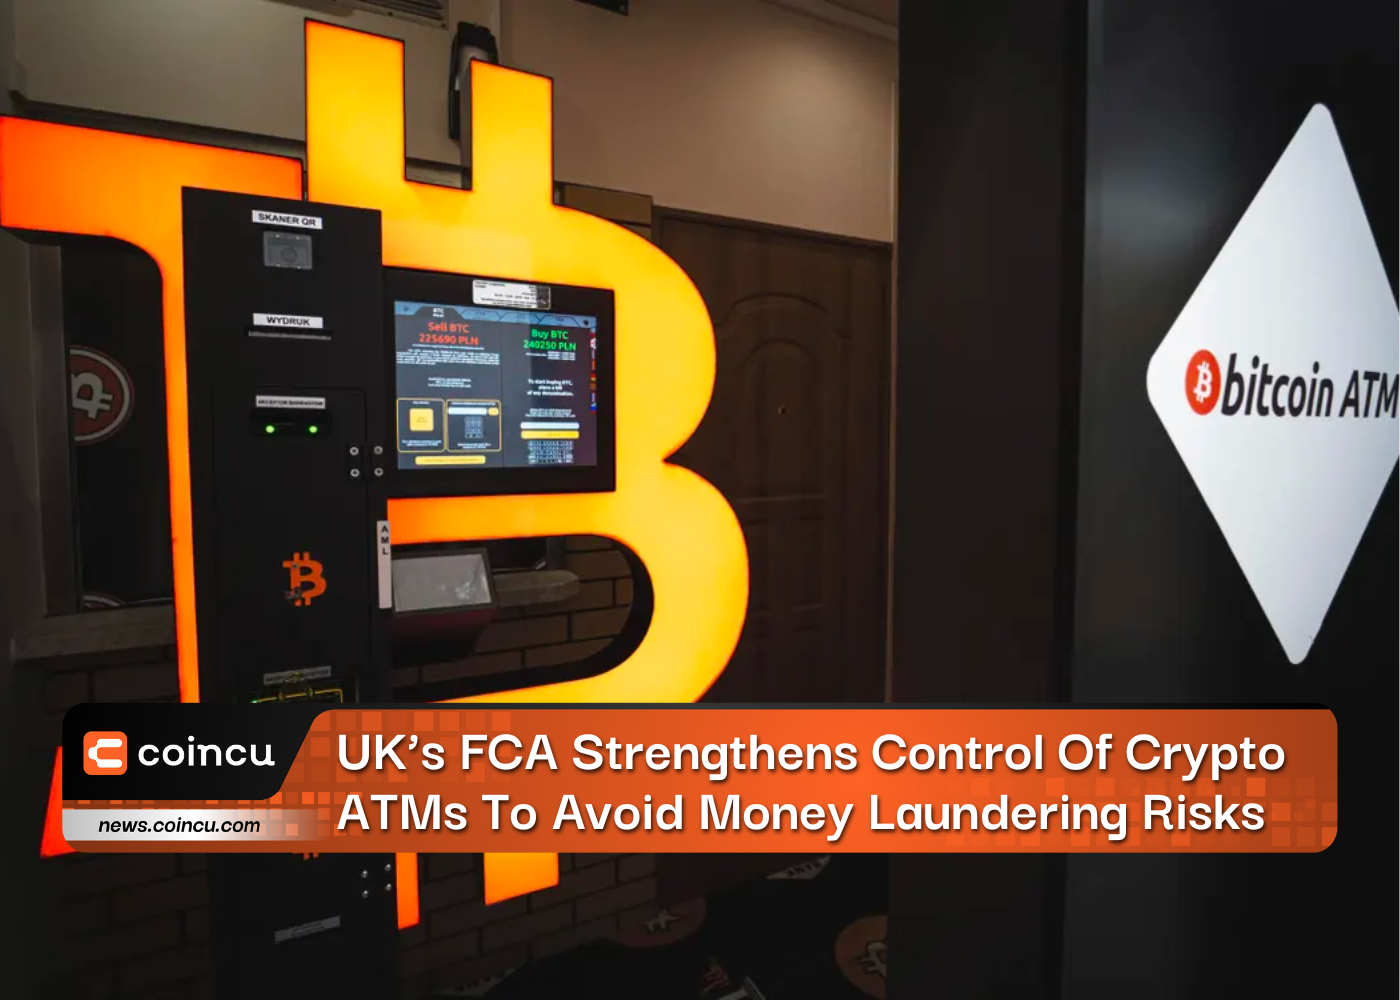 UK’s FCA Strengthens Control Of Crypto ATMs To Avoid Money Laundering Risks